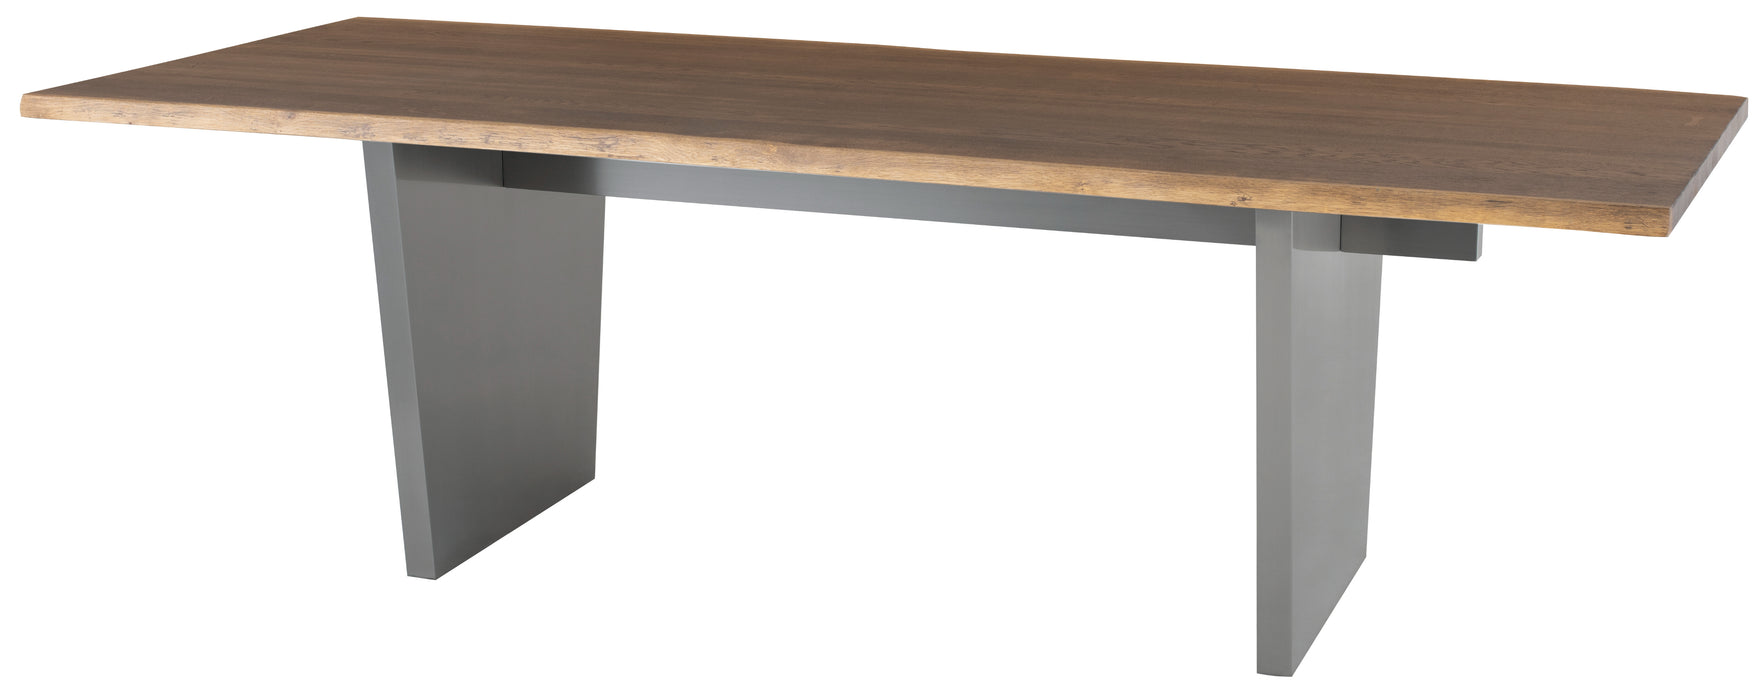 Aiden NL Seared Dining Table